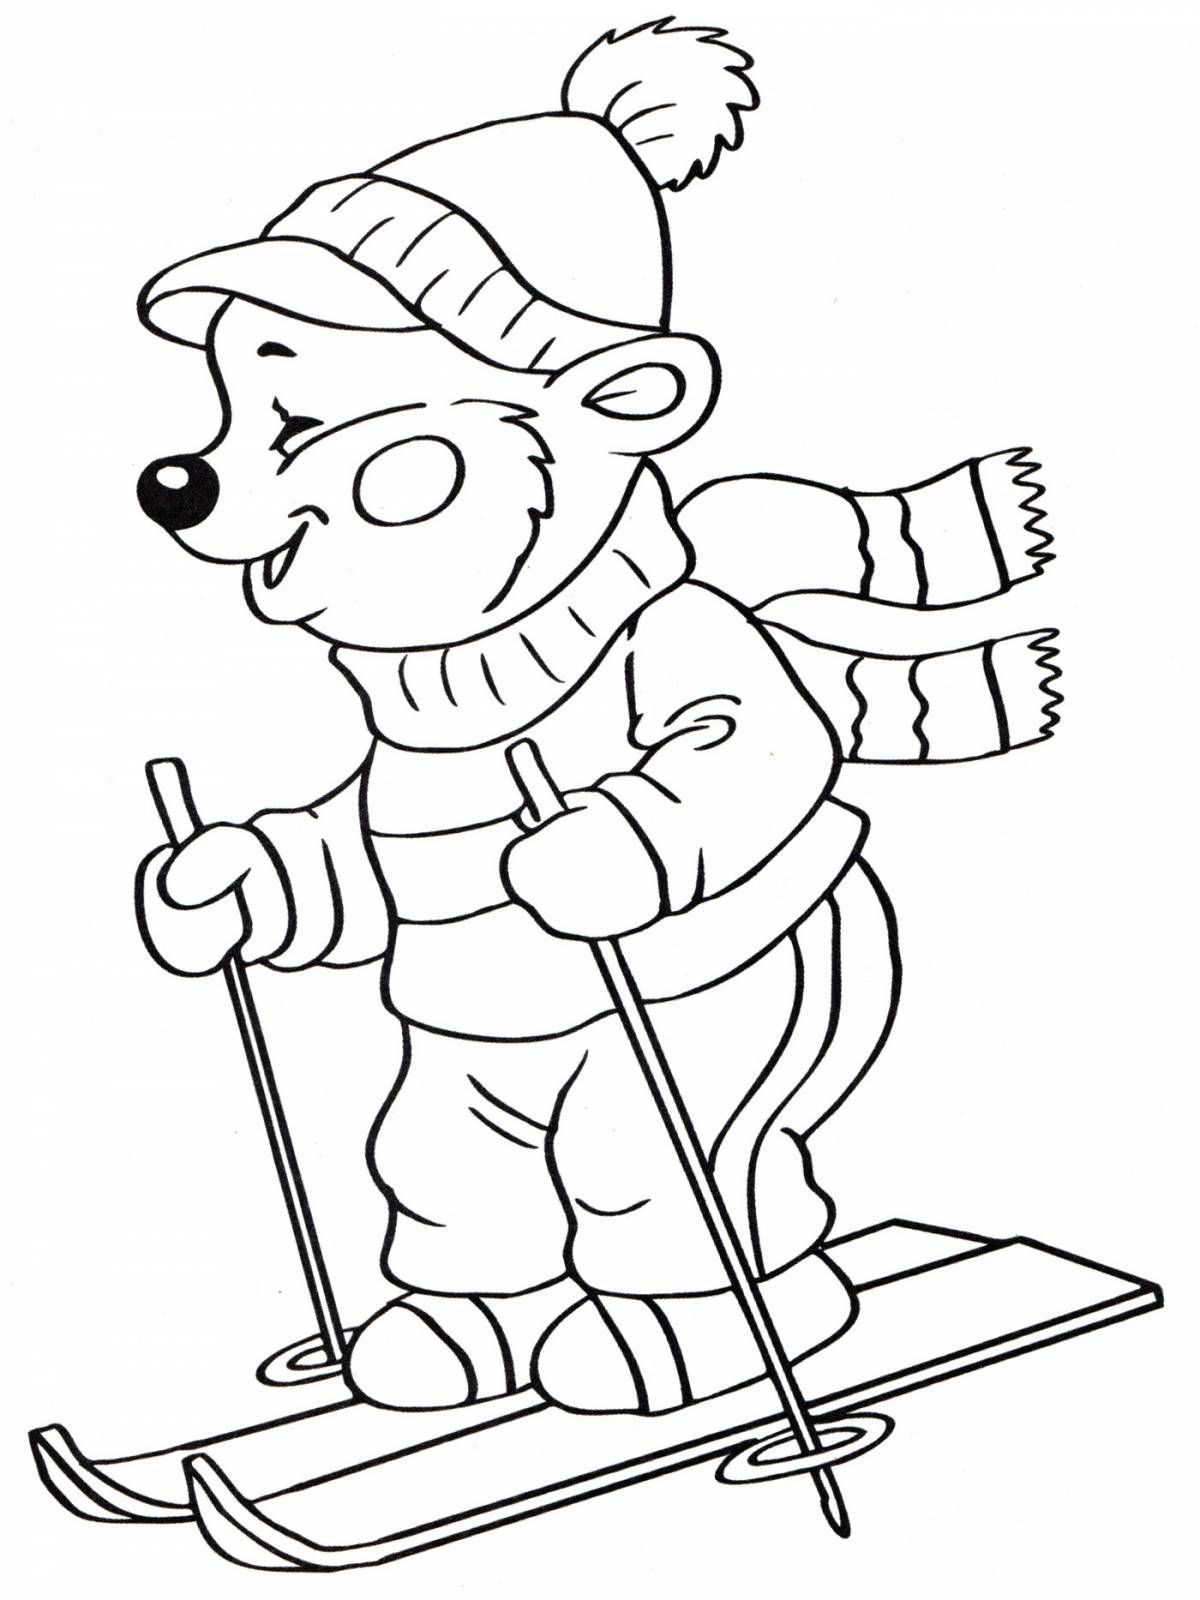 Vibrant coloring book winter sports for kids